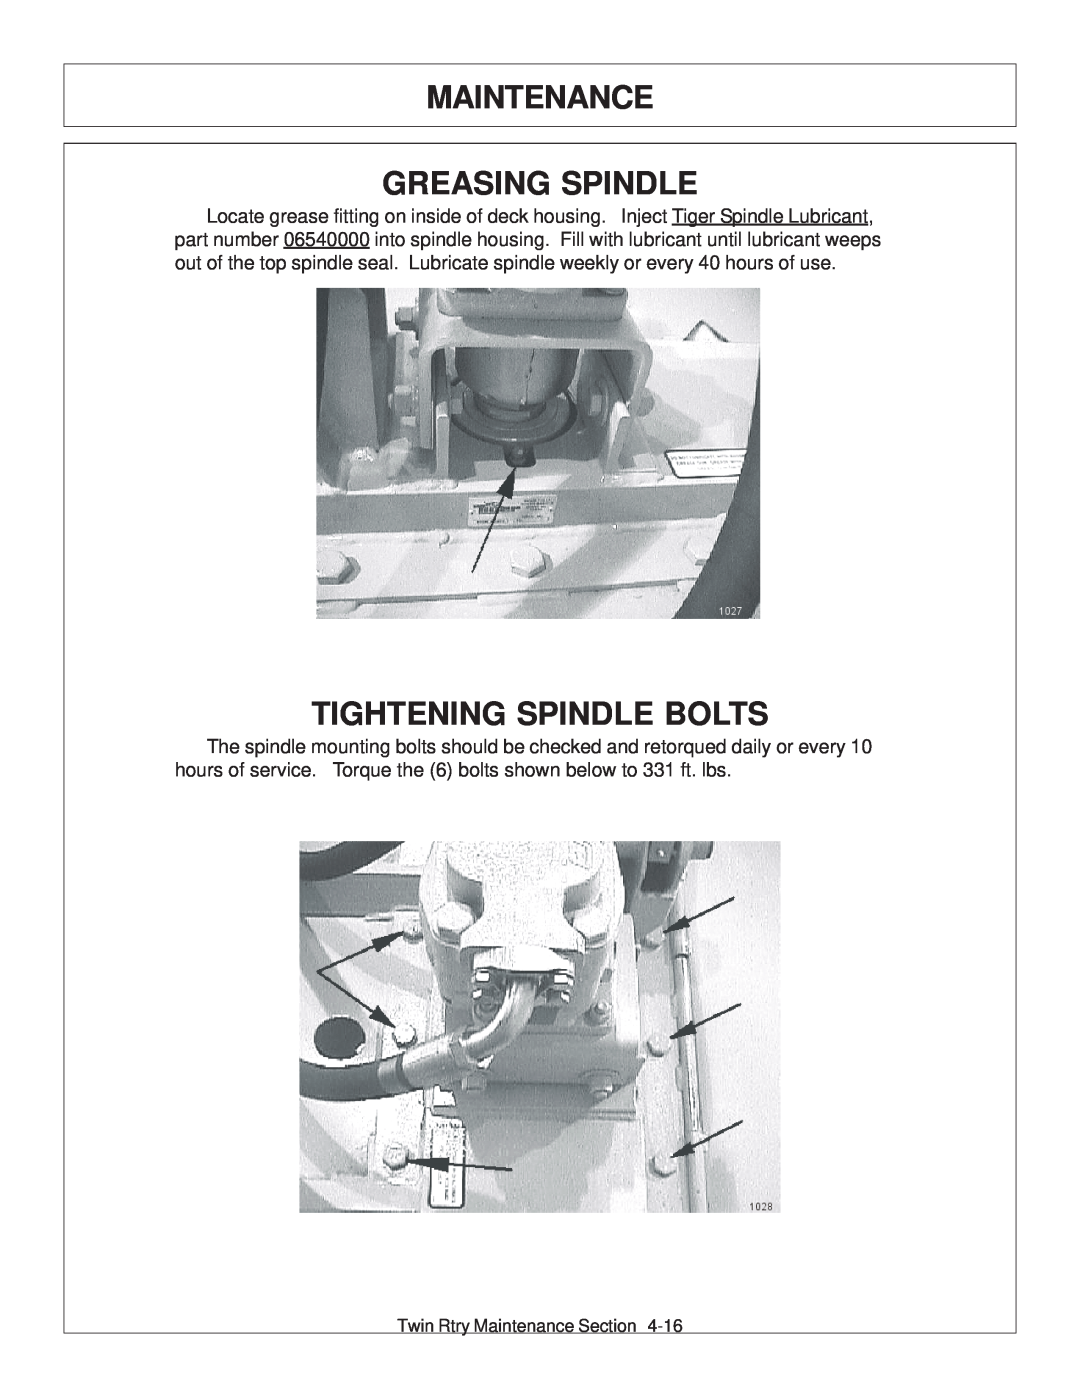 Tiger Products Co., Ltd 6020009 manual Maintenance Greasing Spindle, Tightening Spindle Bolts 